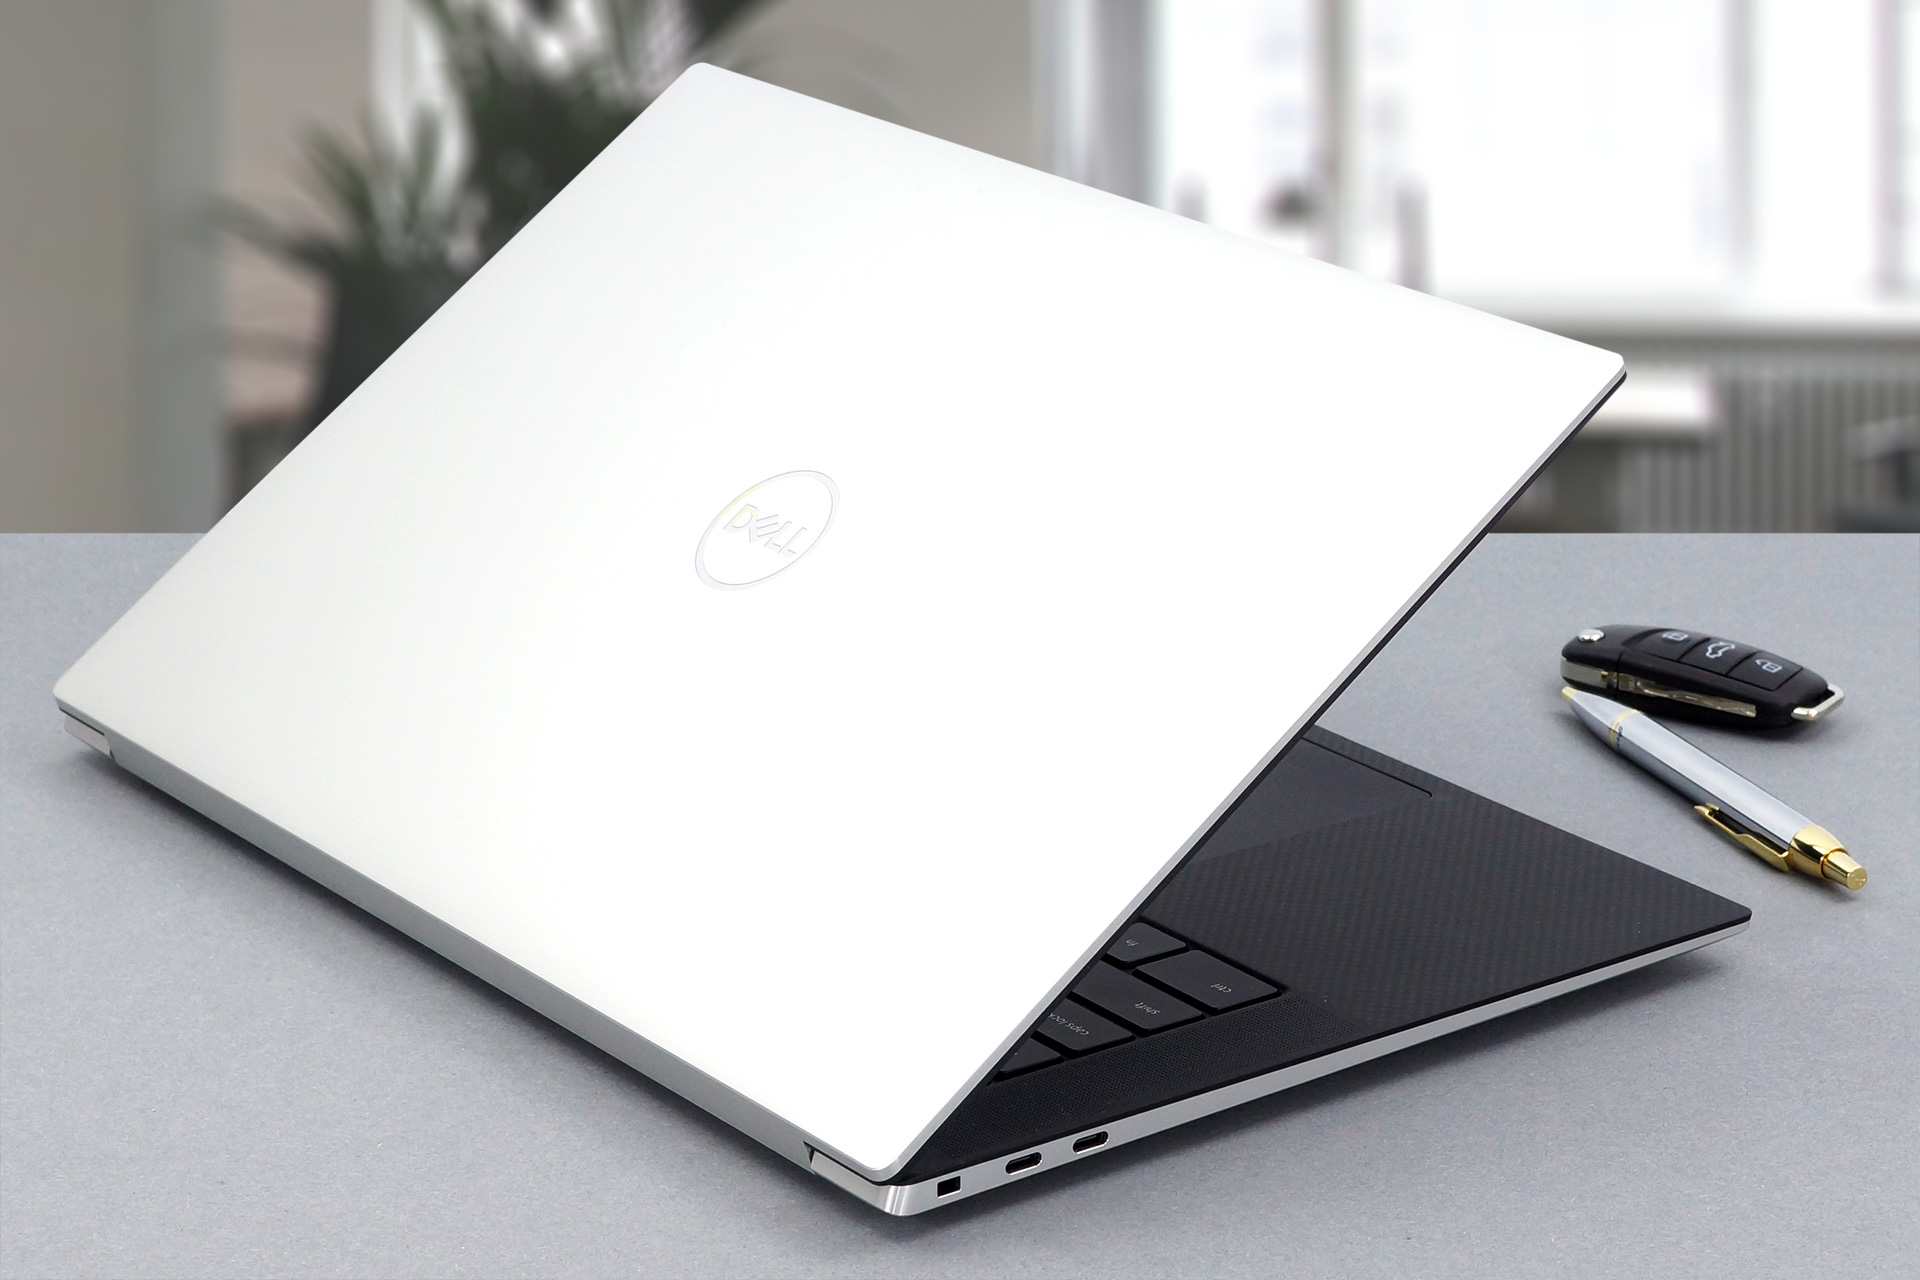 XPS 15 9500 review - finally the redesign we were all waiting for | LaptopMedia.com